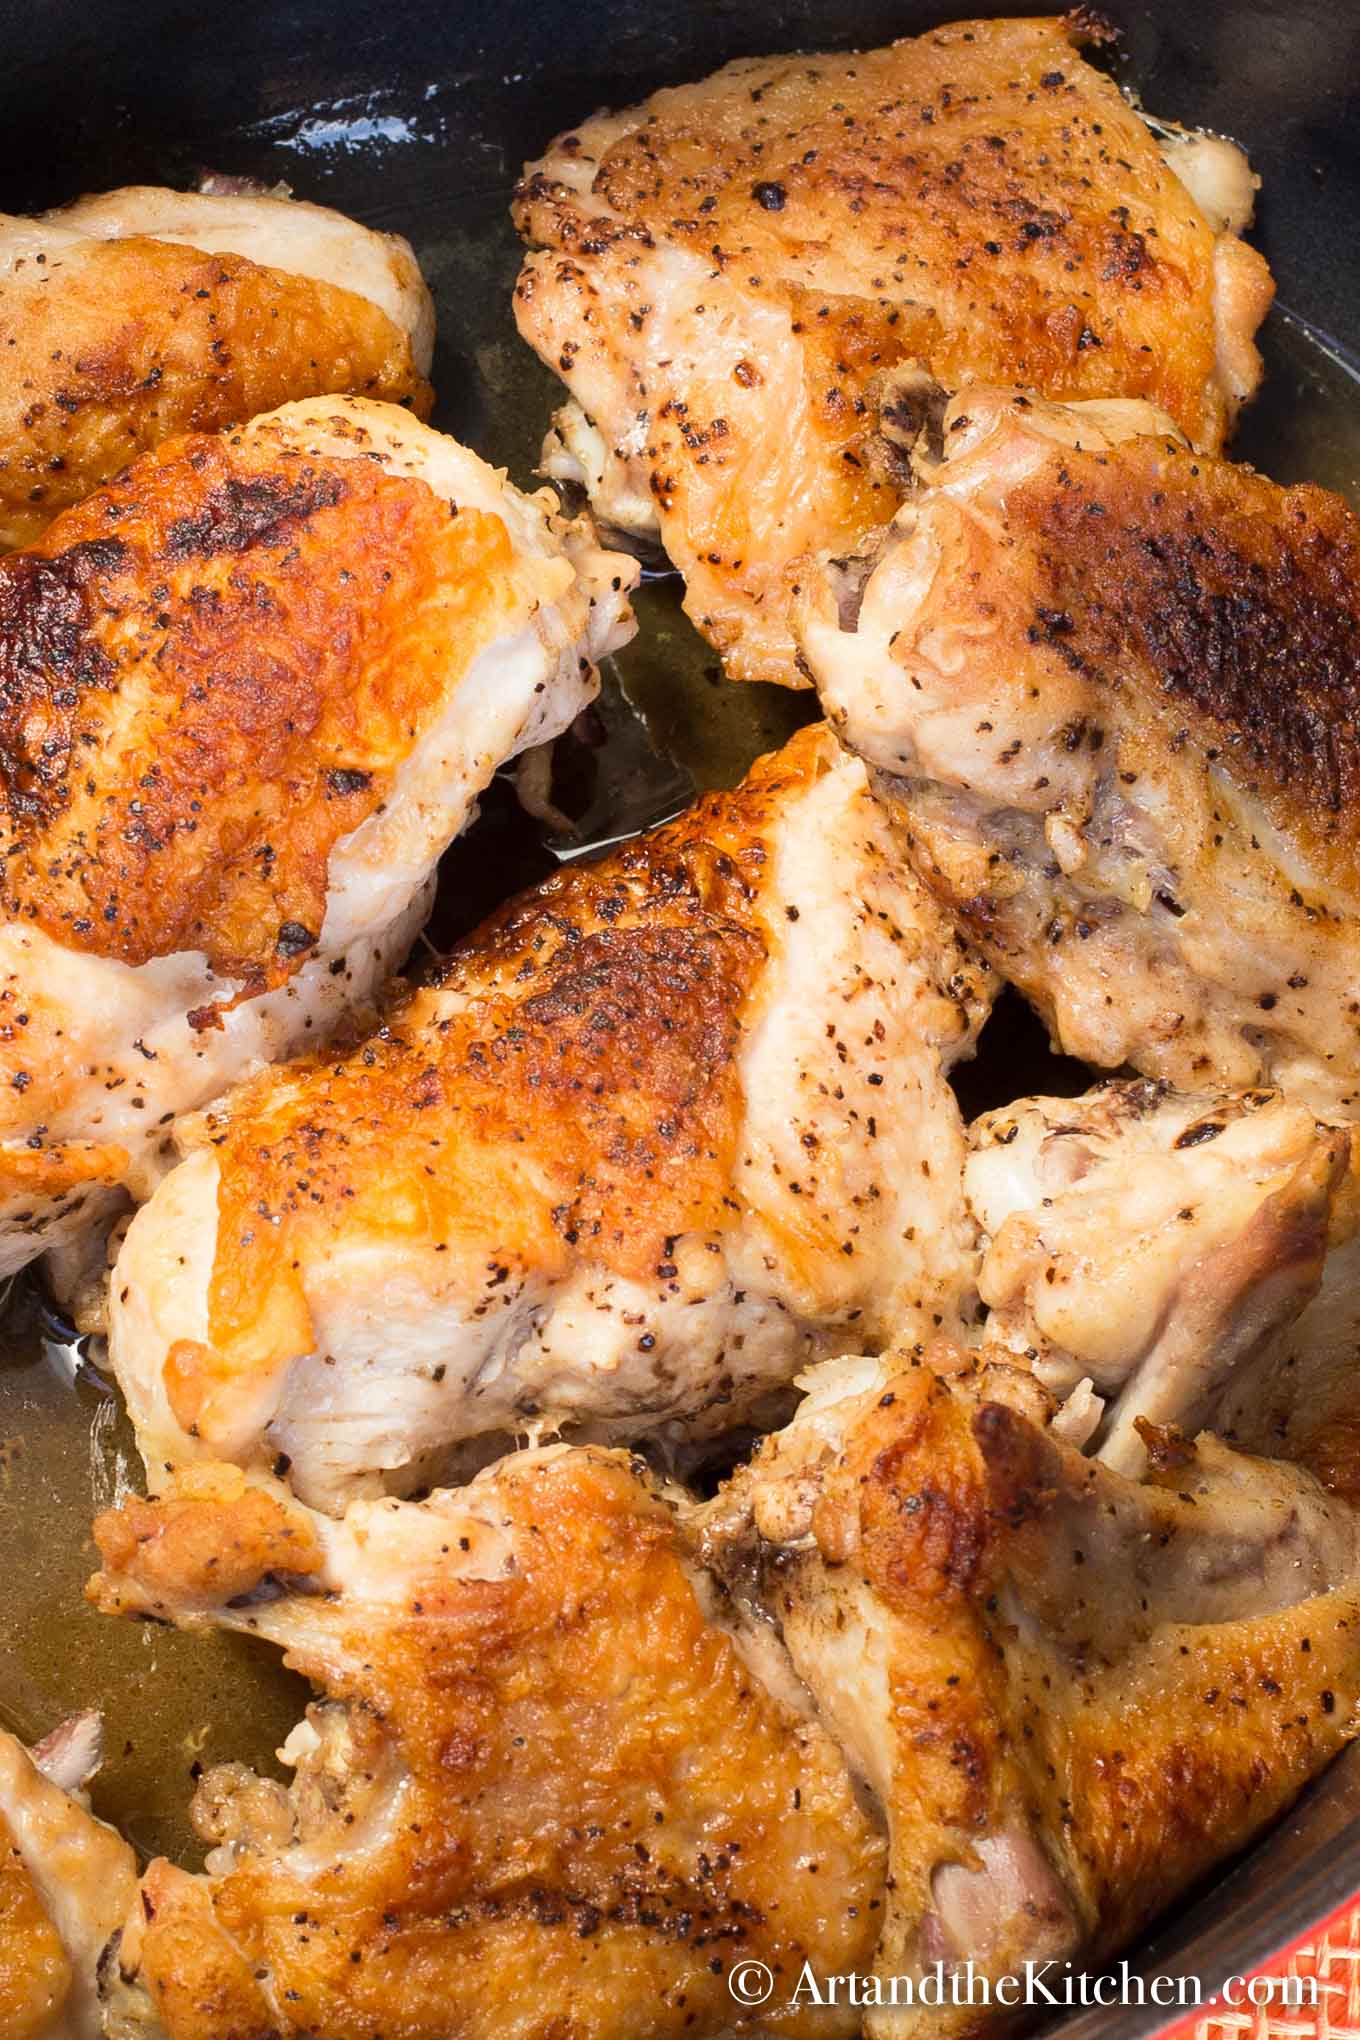 Cut up pieces of chicken roasted in large black roasting pan.